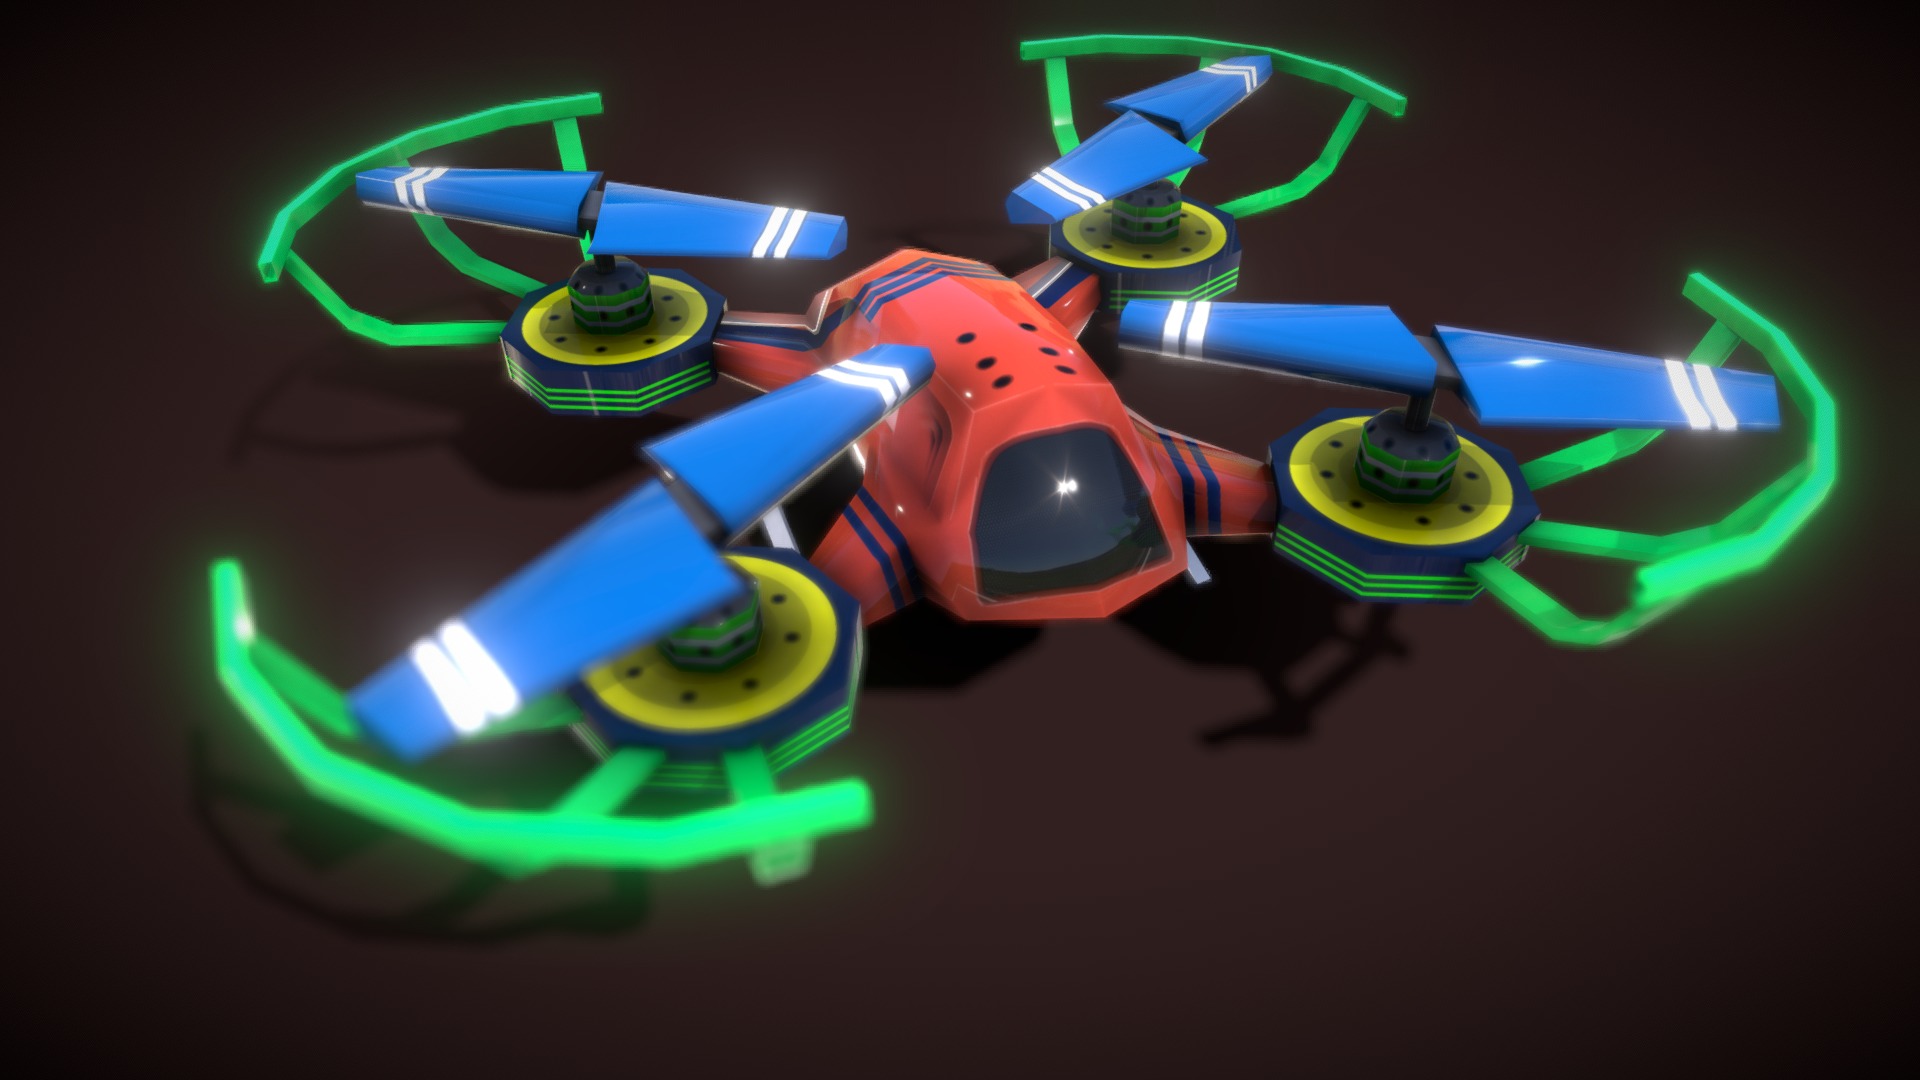 3D model Flycam Cartoon 1 - This is a 3D model of the Flycam Cartoon 1. The 3D model is about a toy helicopter with a blue light.